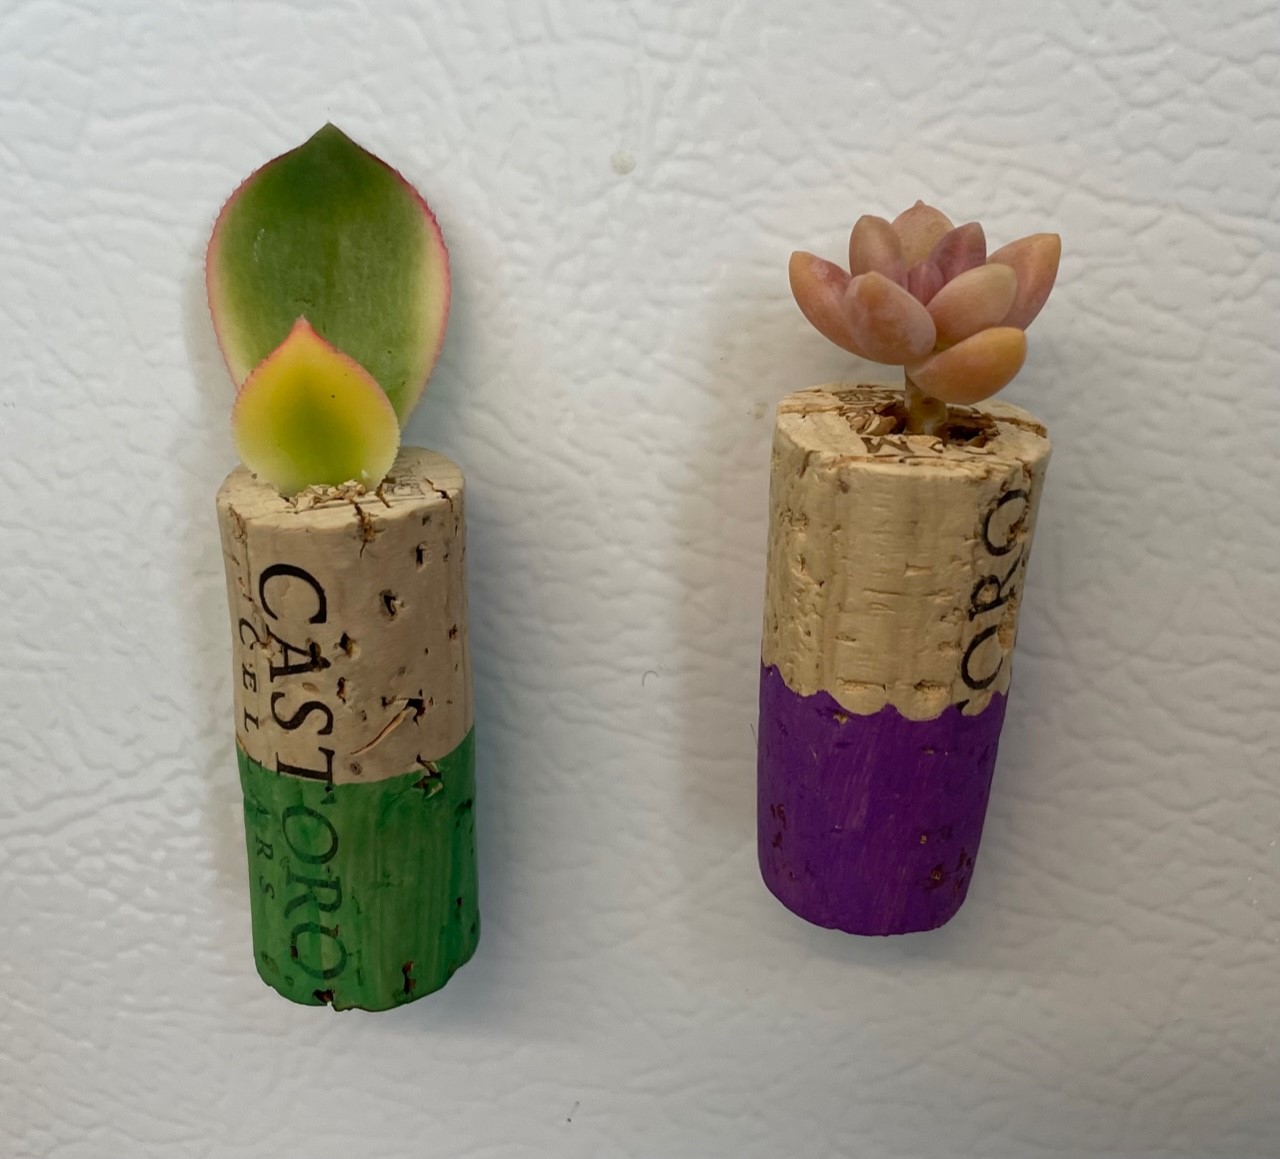 2 magnets made of succulents planted into wine corks.